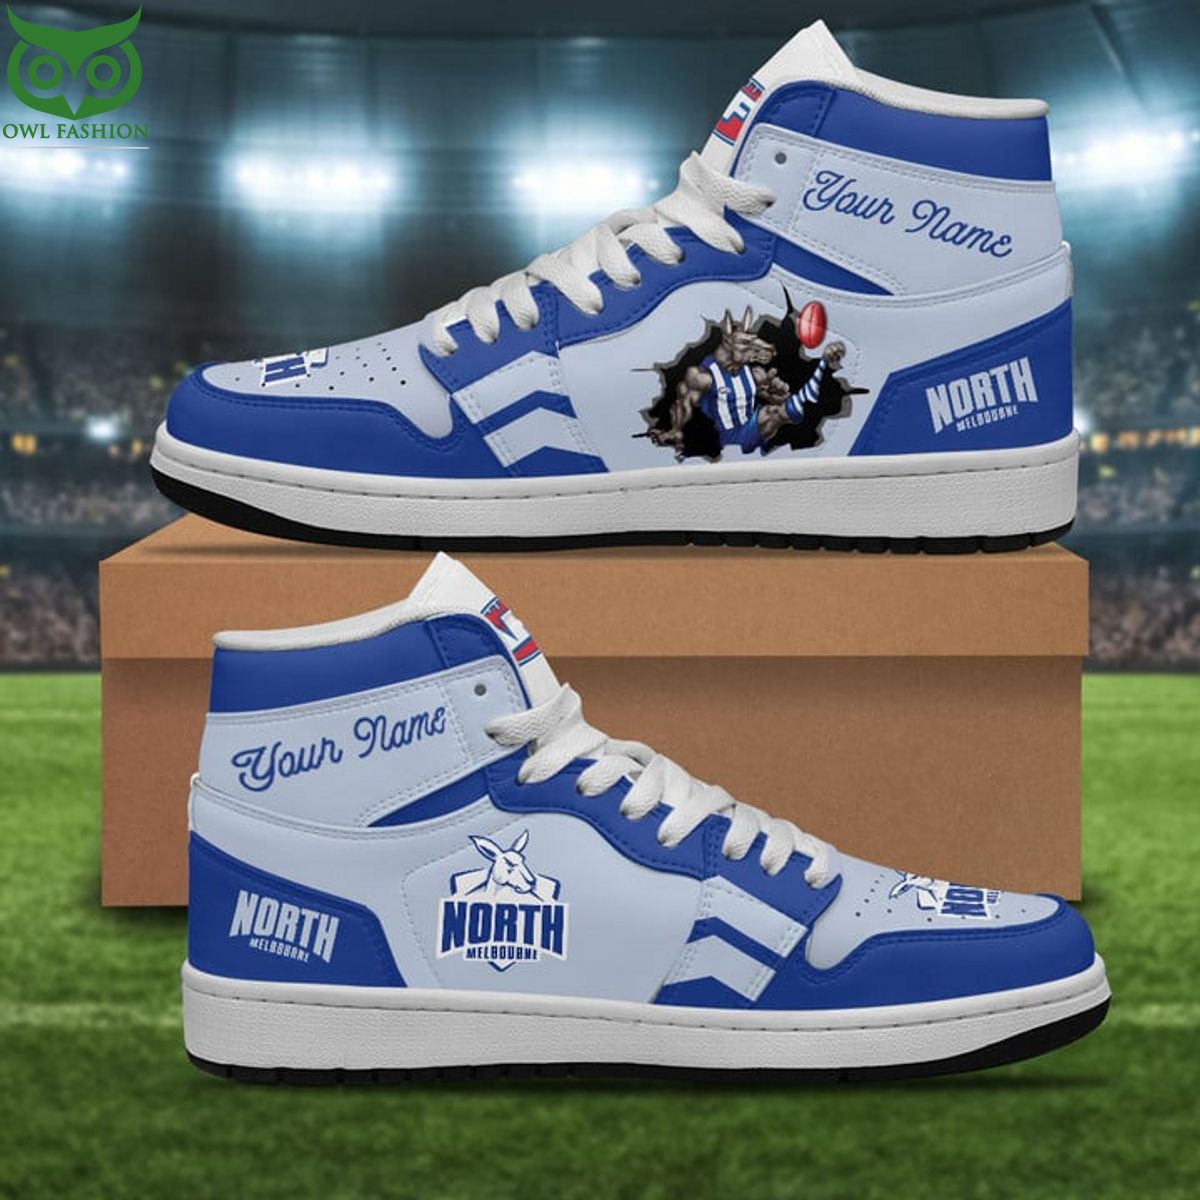 New 2023 AFL North Melbourne Limited Edition Air Jordan 1 You look lazy